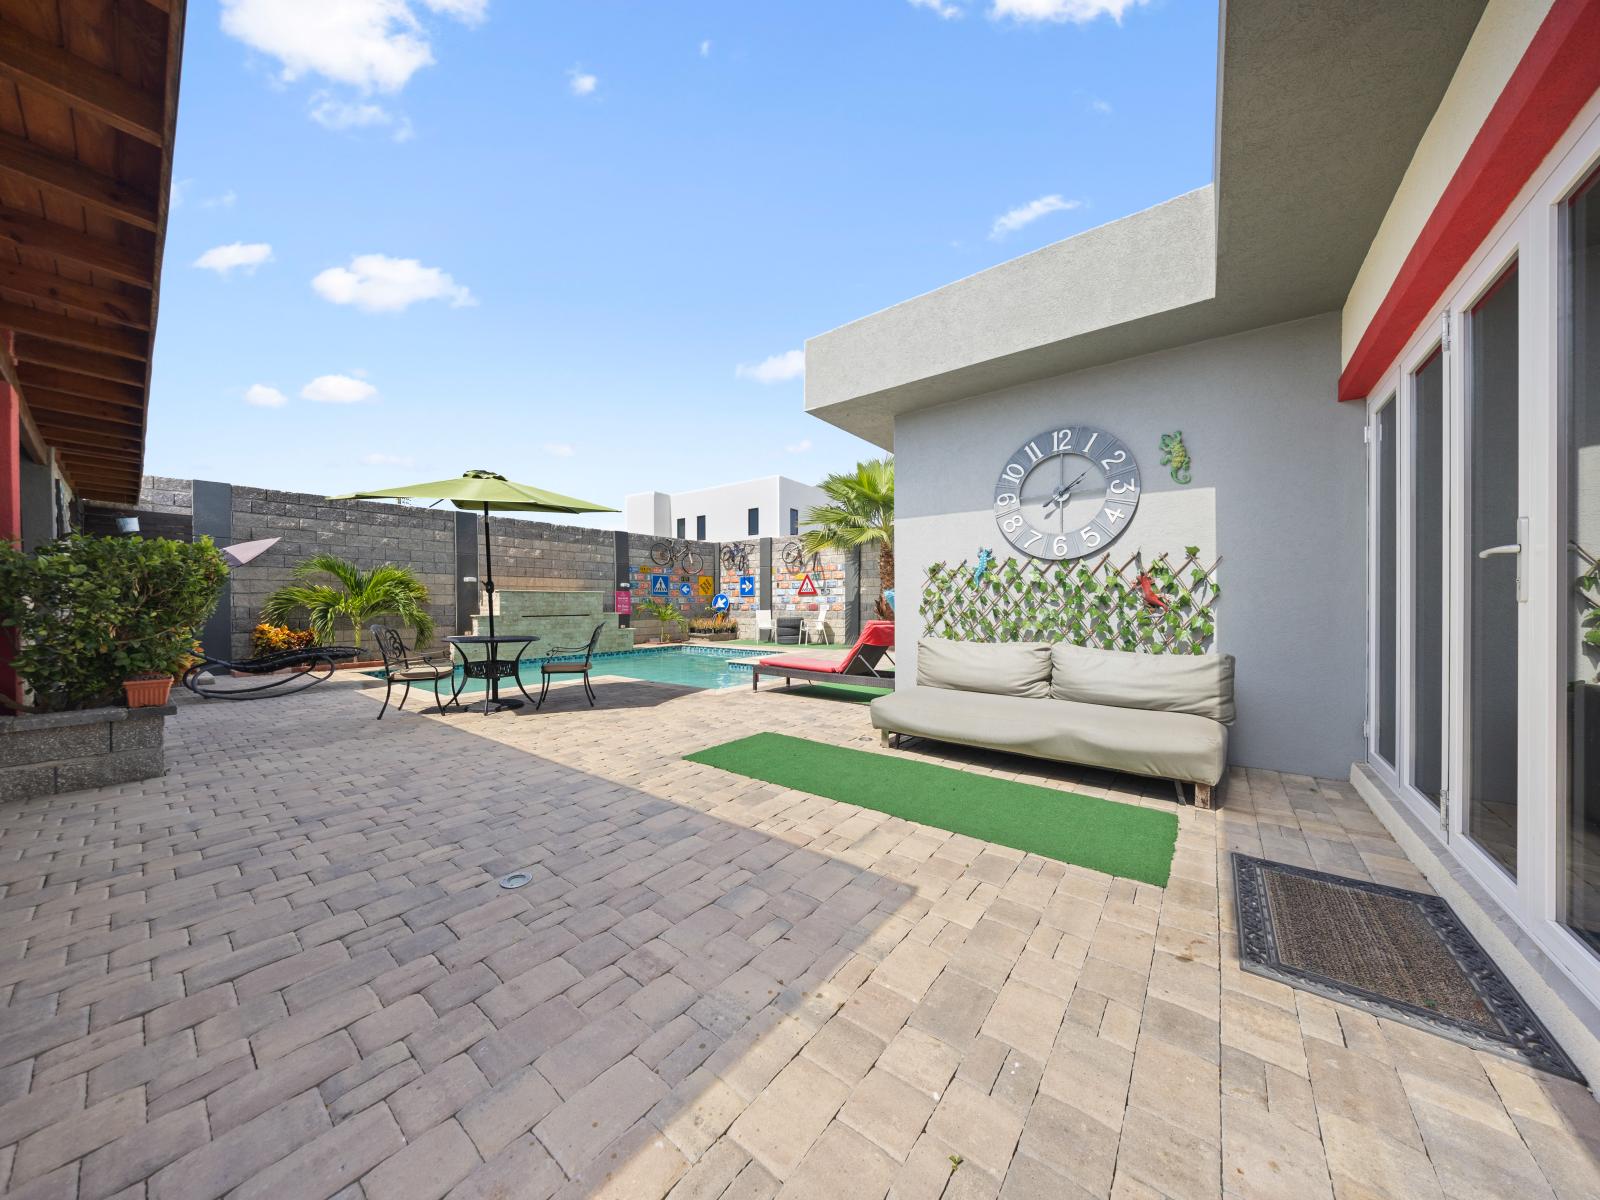 The backyard is overflowing with creative art designs of the home in Aruba - Create lasting memories with loved ones as you gather in our picturesque outdoor area with seating - Memories are made under the open sky with sunning surroundings